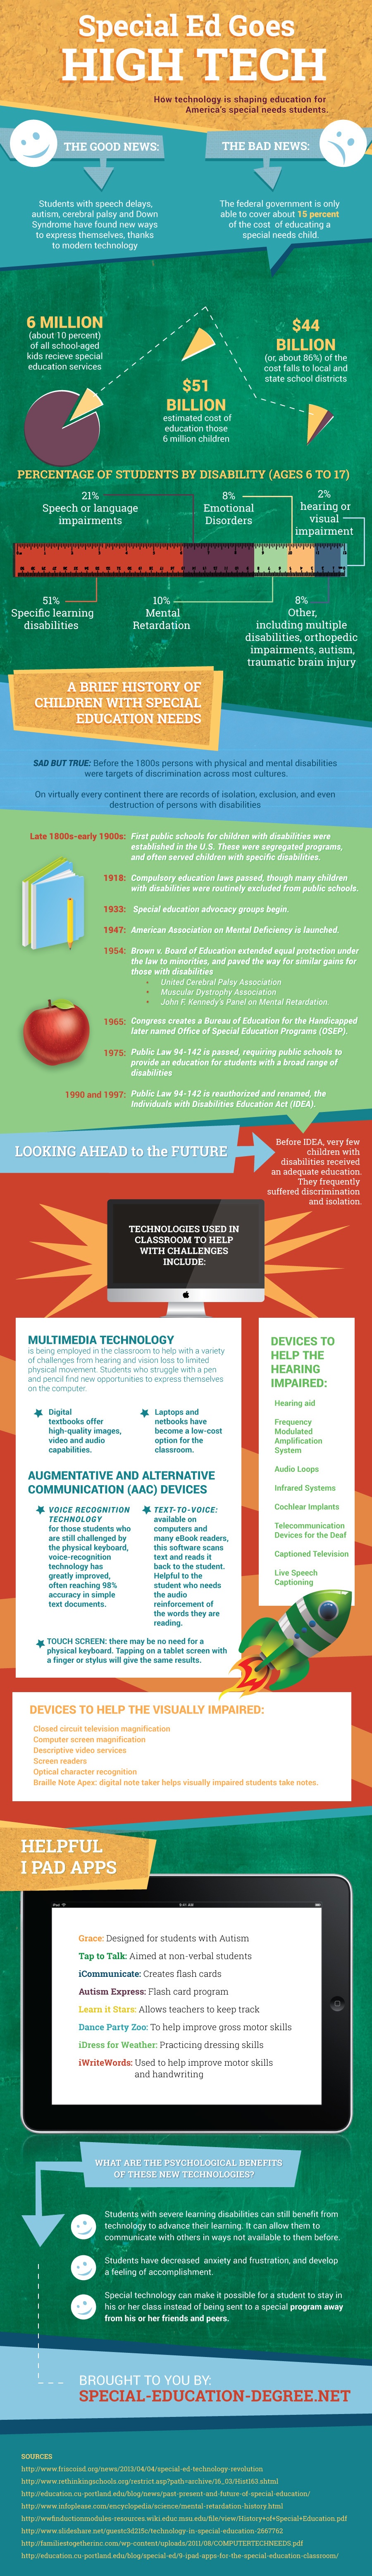 Educational Technology in Special Education Infographic